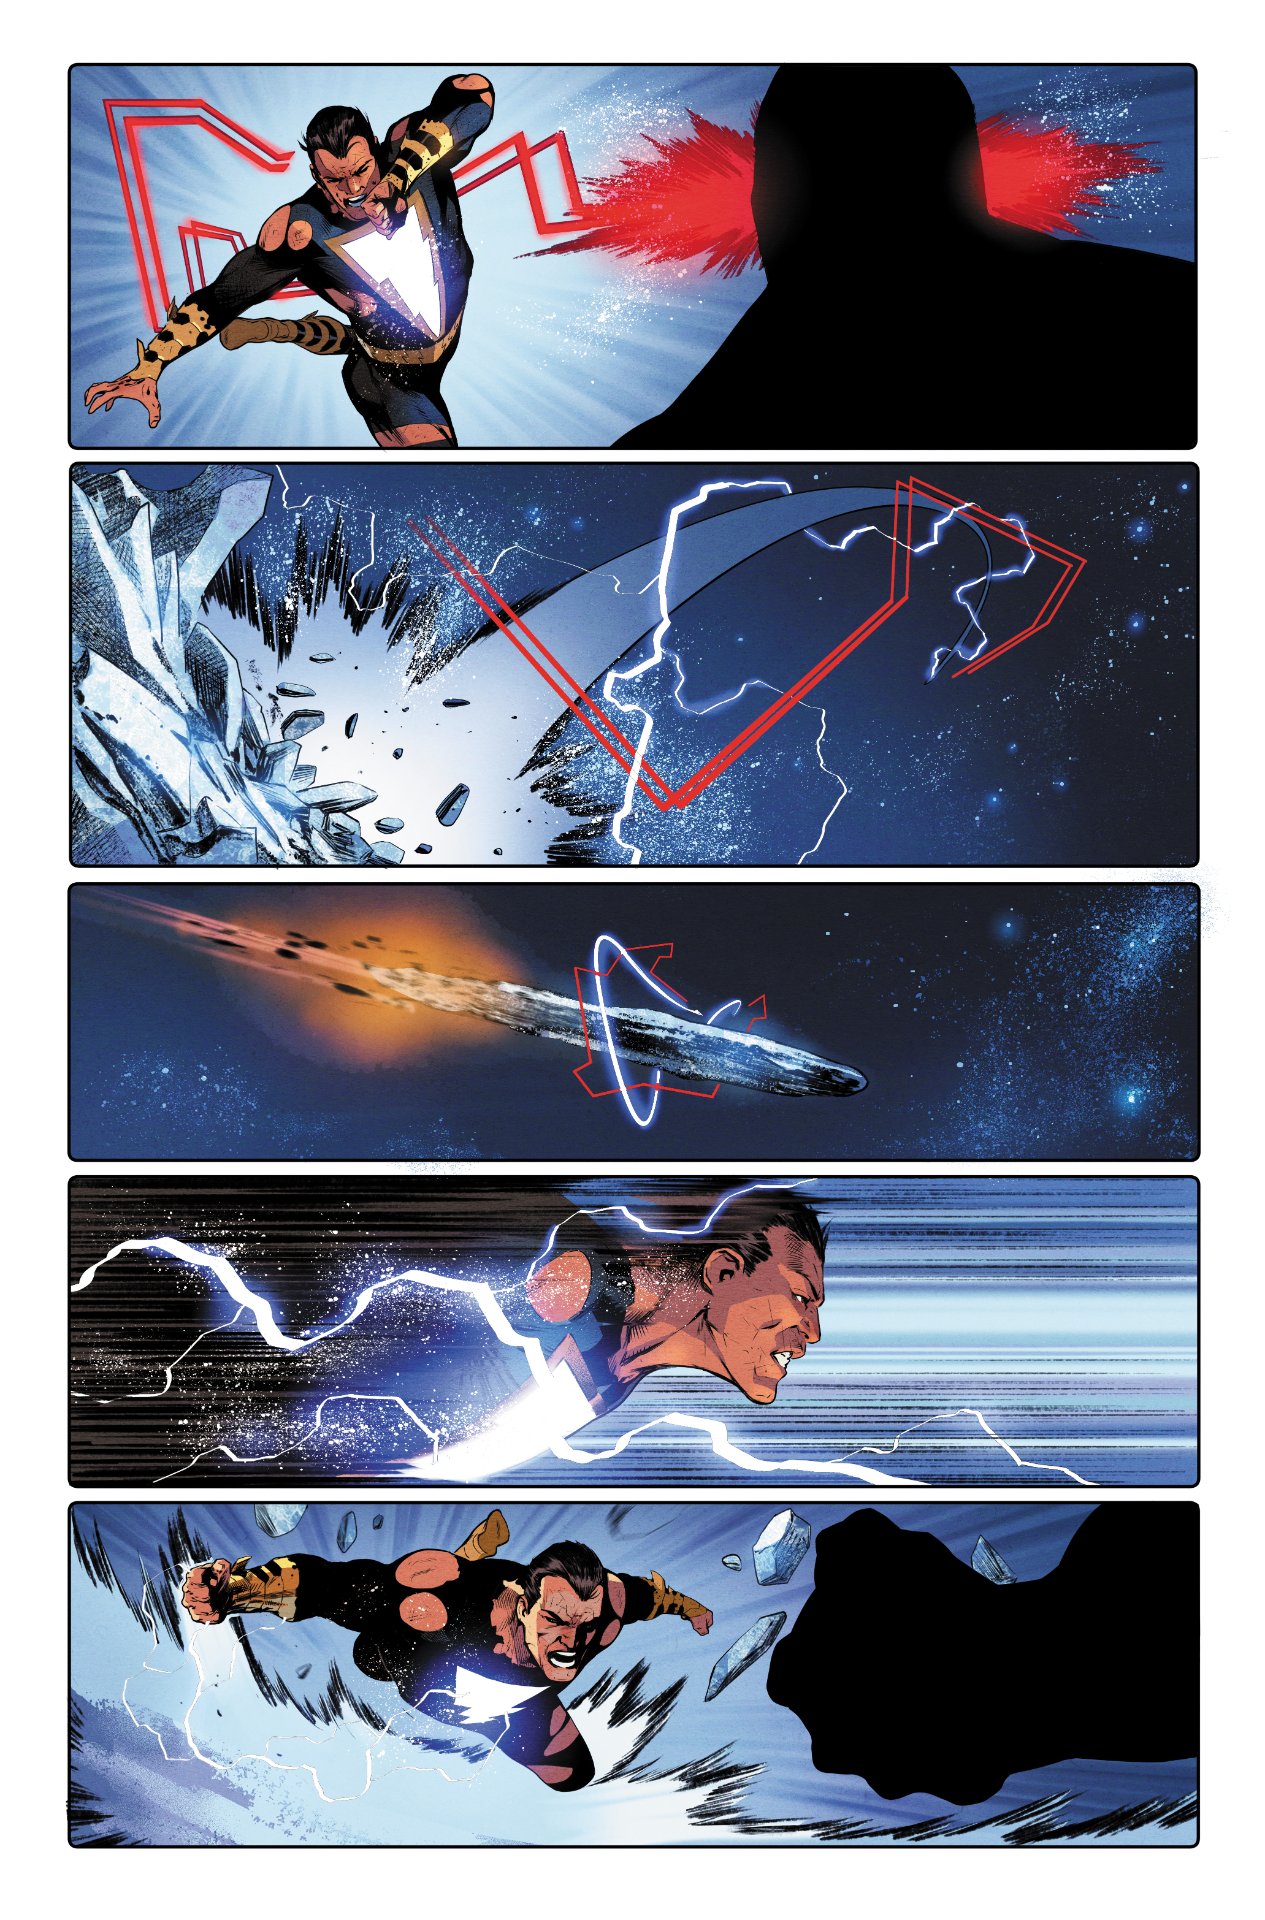 a page from Black Adam #1 by Rafa Sandoval